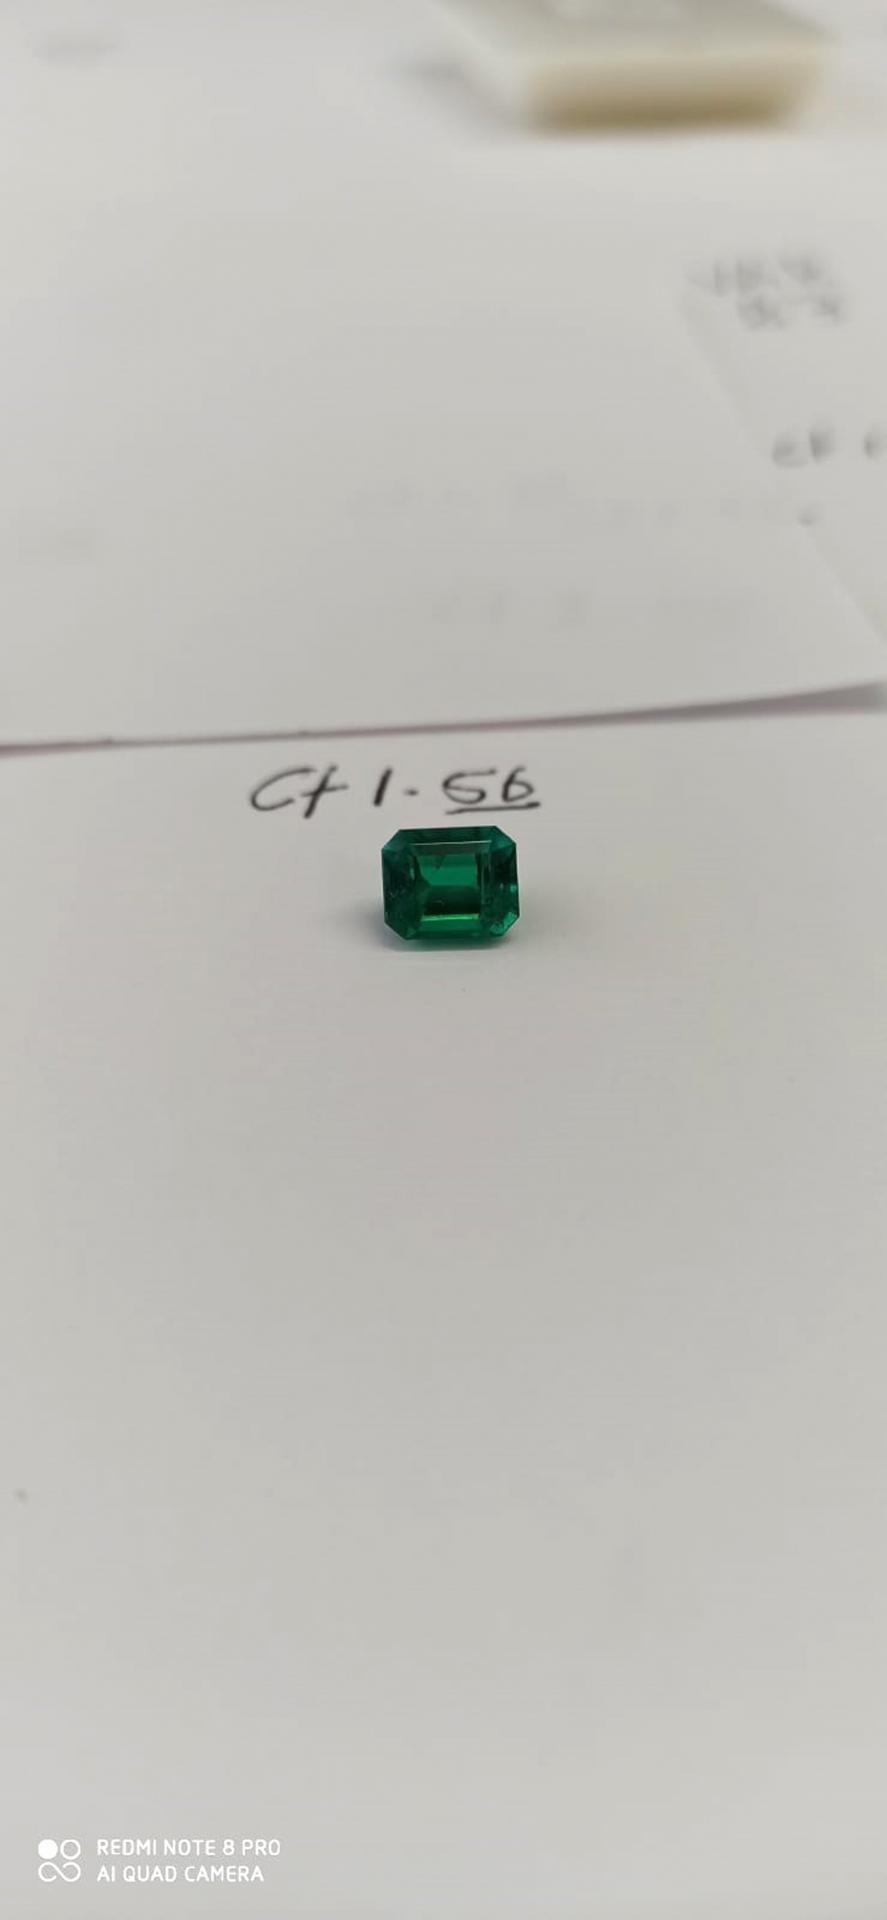 1.56 Ct. Colombian Emerald (Exceptional)